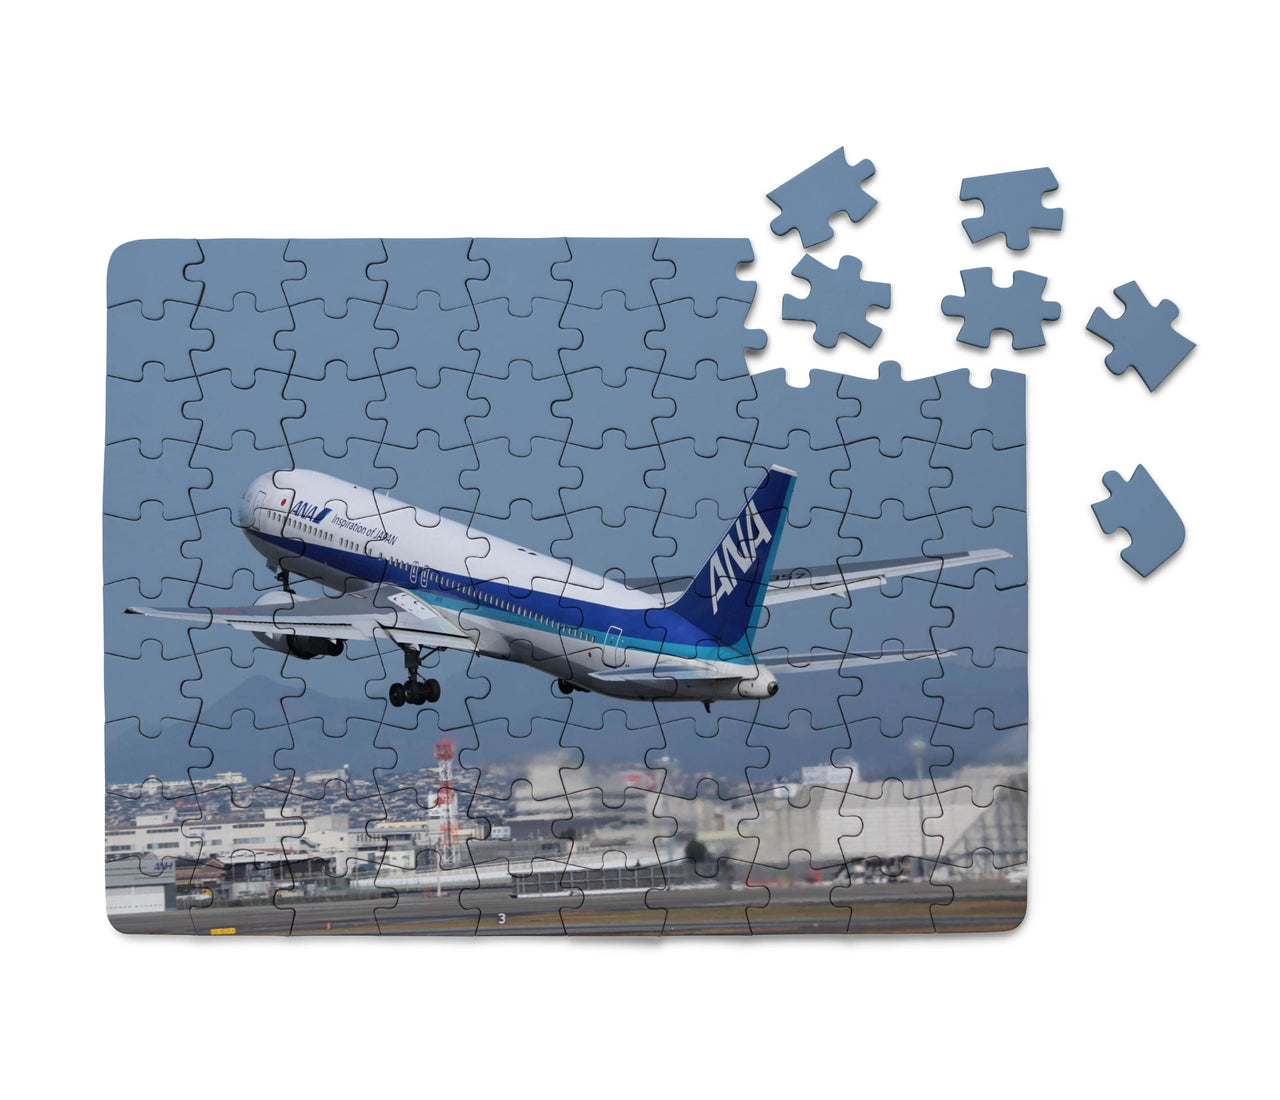 Departing ANA's Boeing 767 Printed Puzzles Aviation Shop 